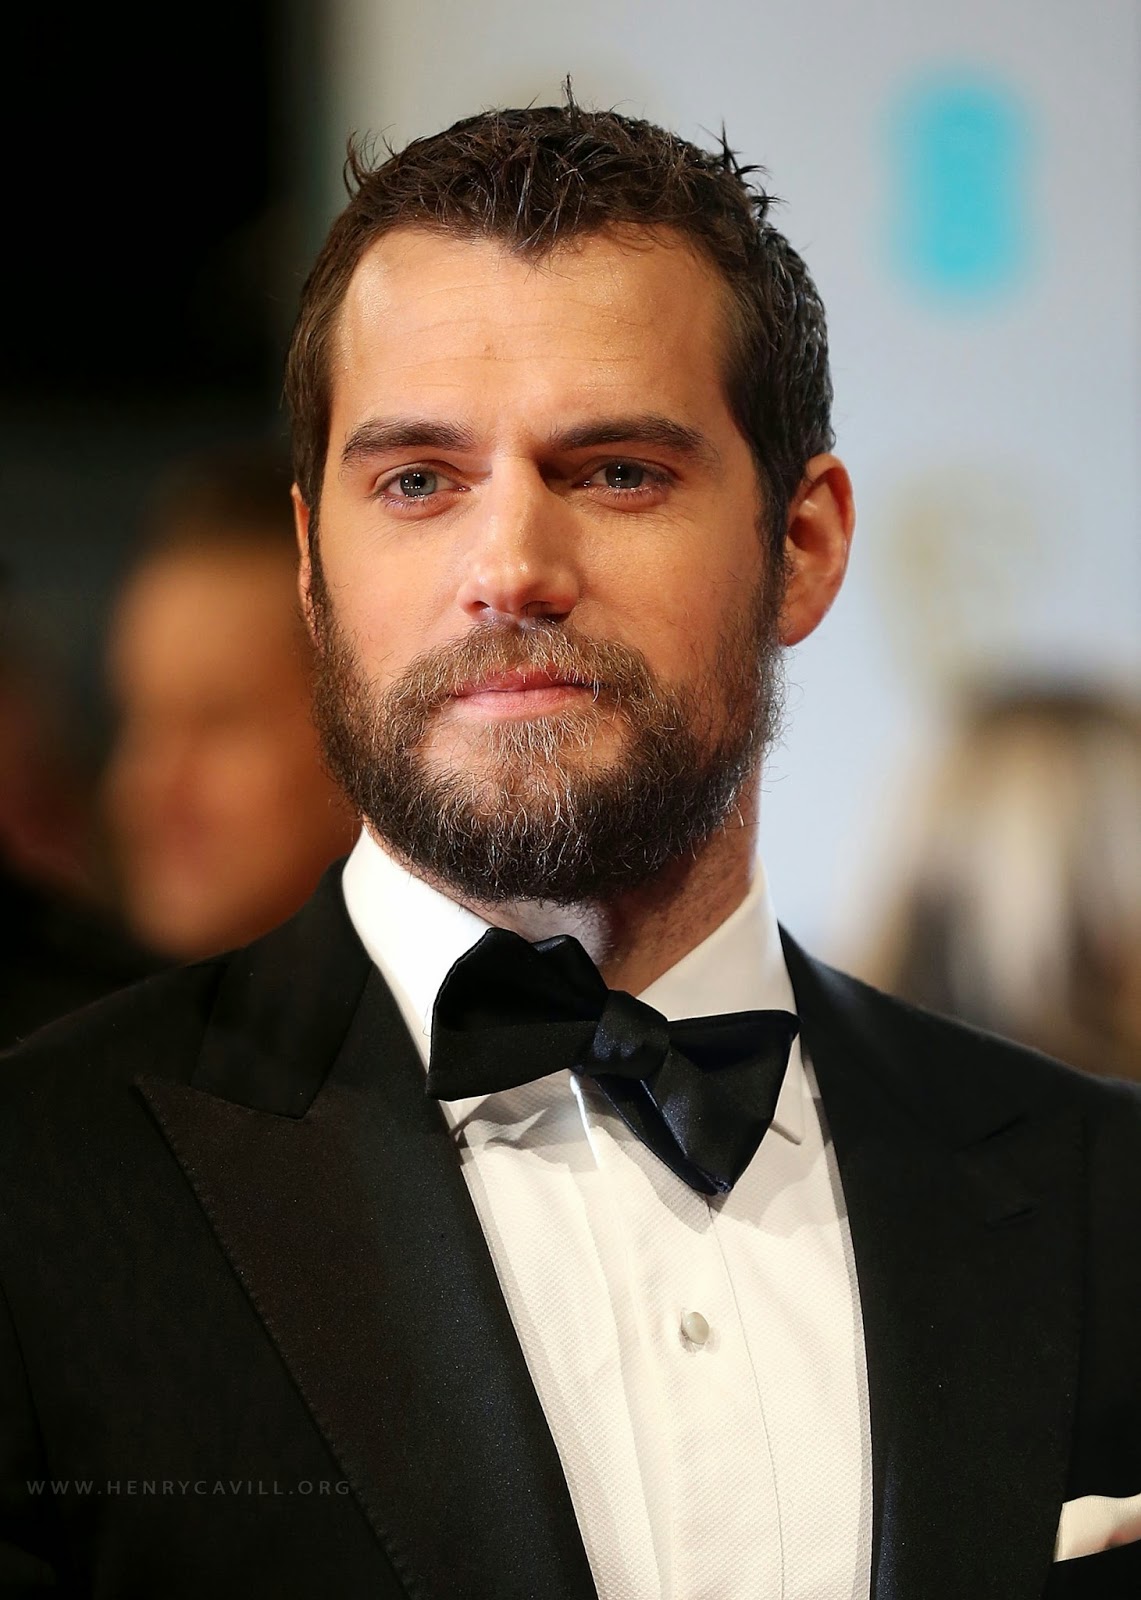 HD Quality Wallpaper | Collection: Celebrity, 1141x1600 Henry Cavill